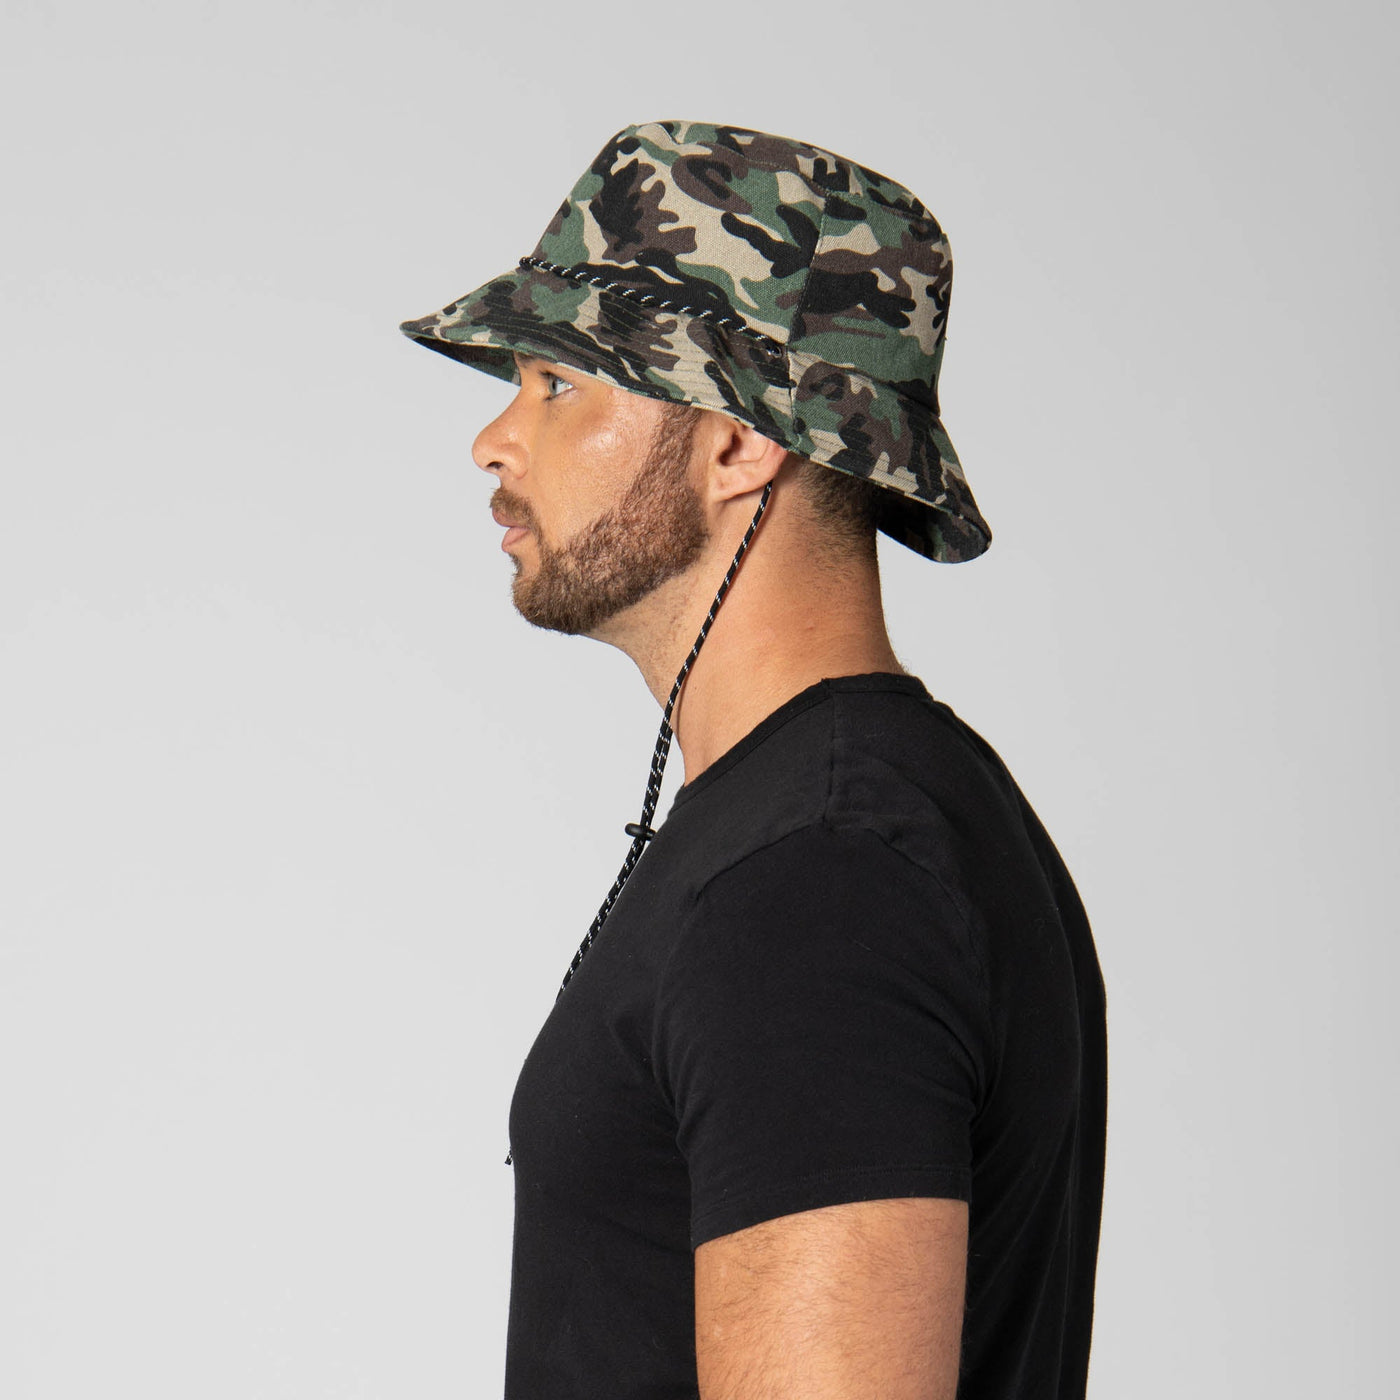 OUTDOOR - Camo Cut And Sew Sublimated Camo Print Bucket Hat